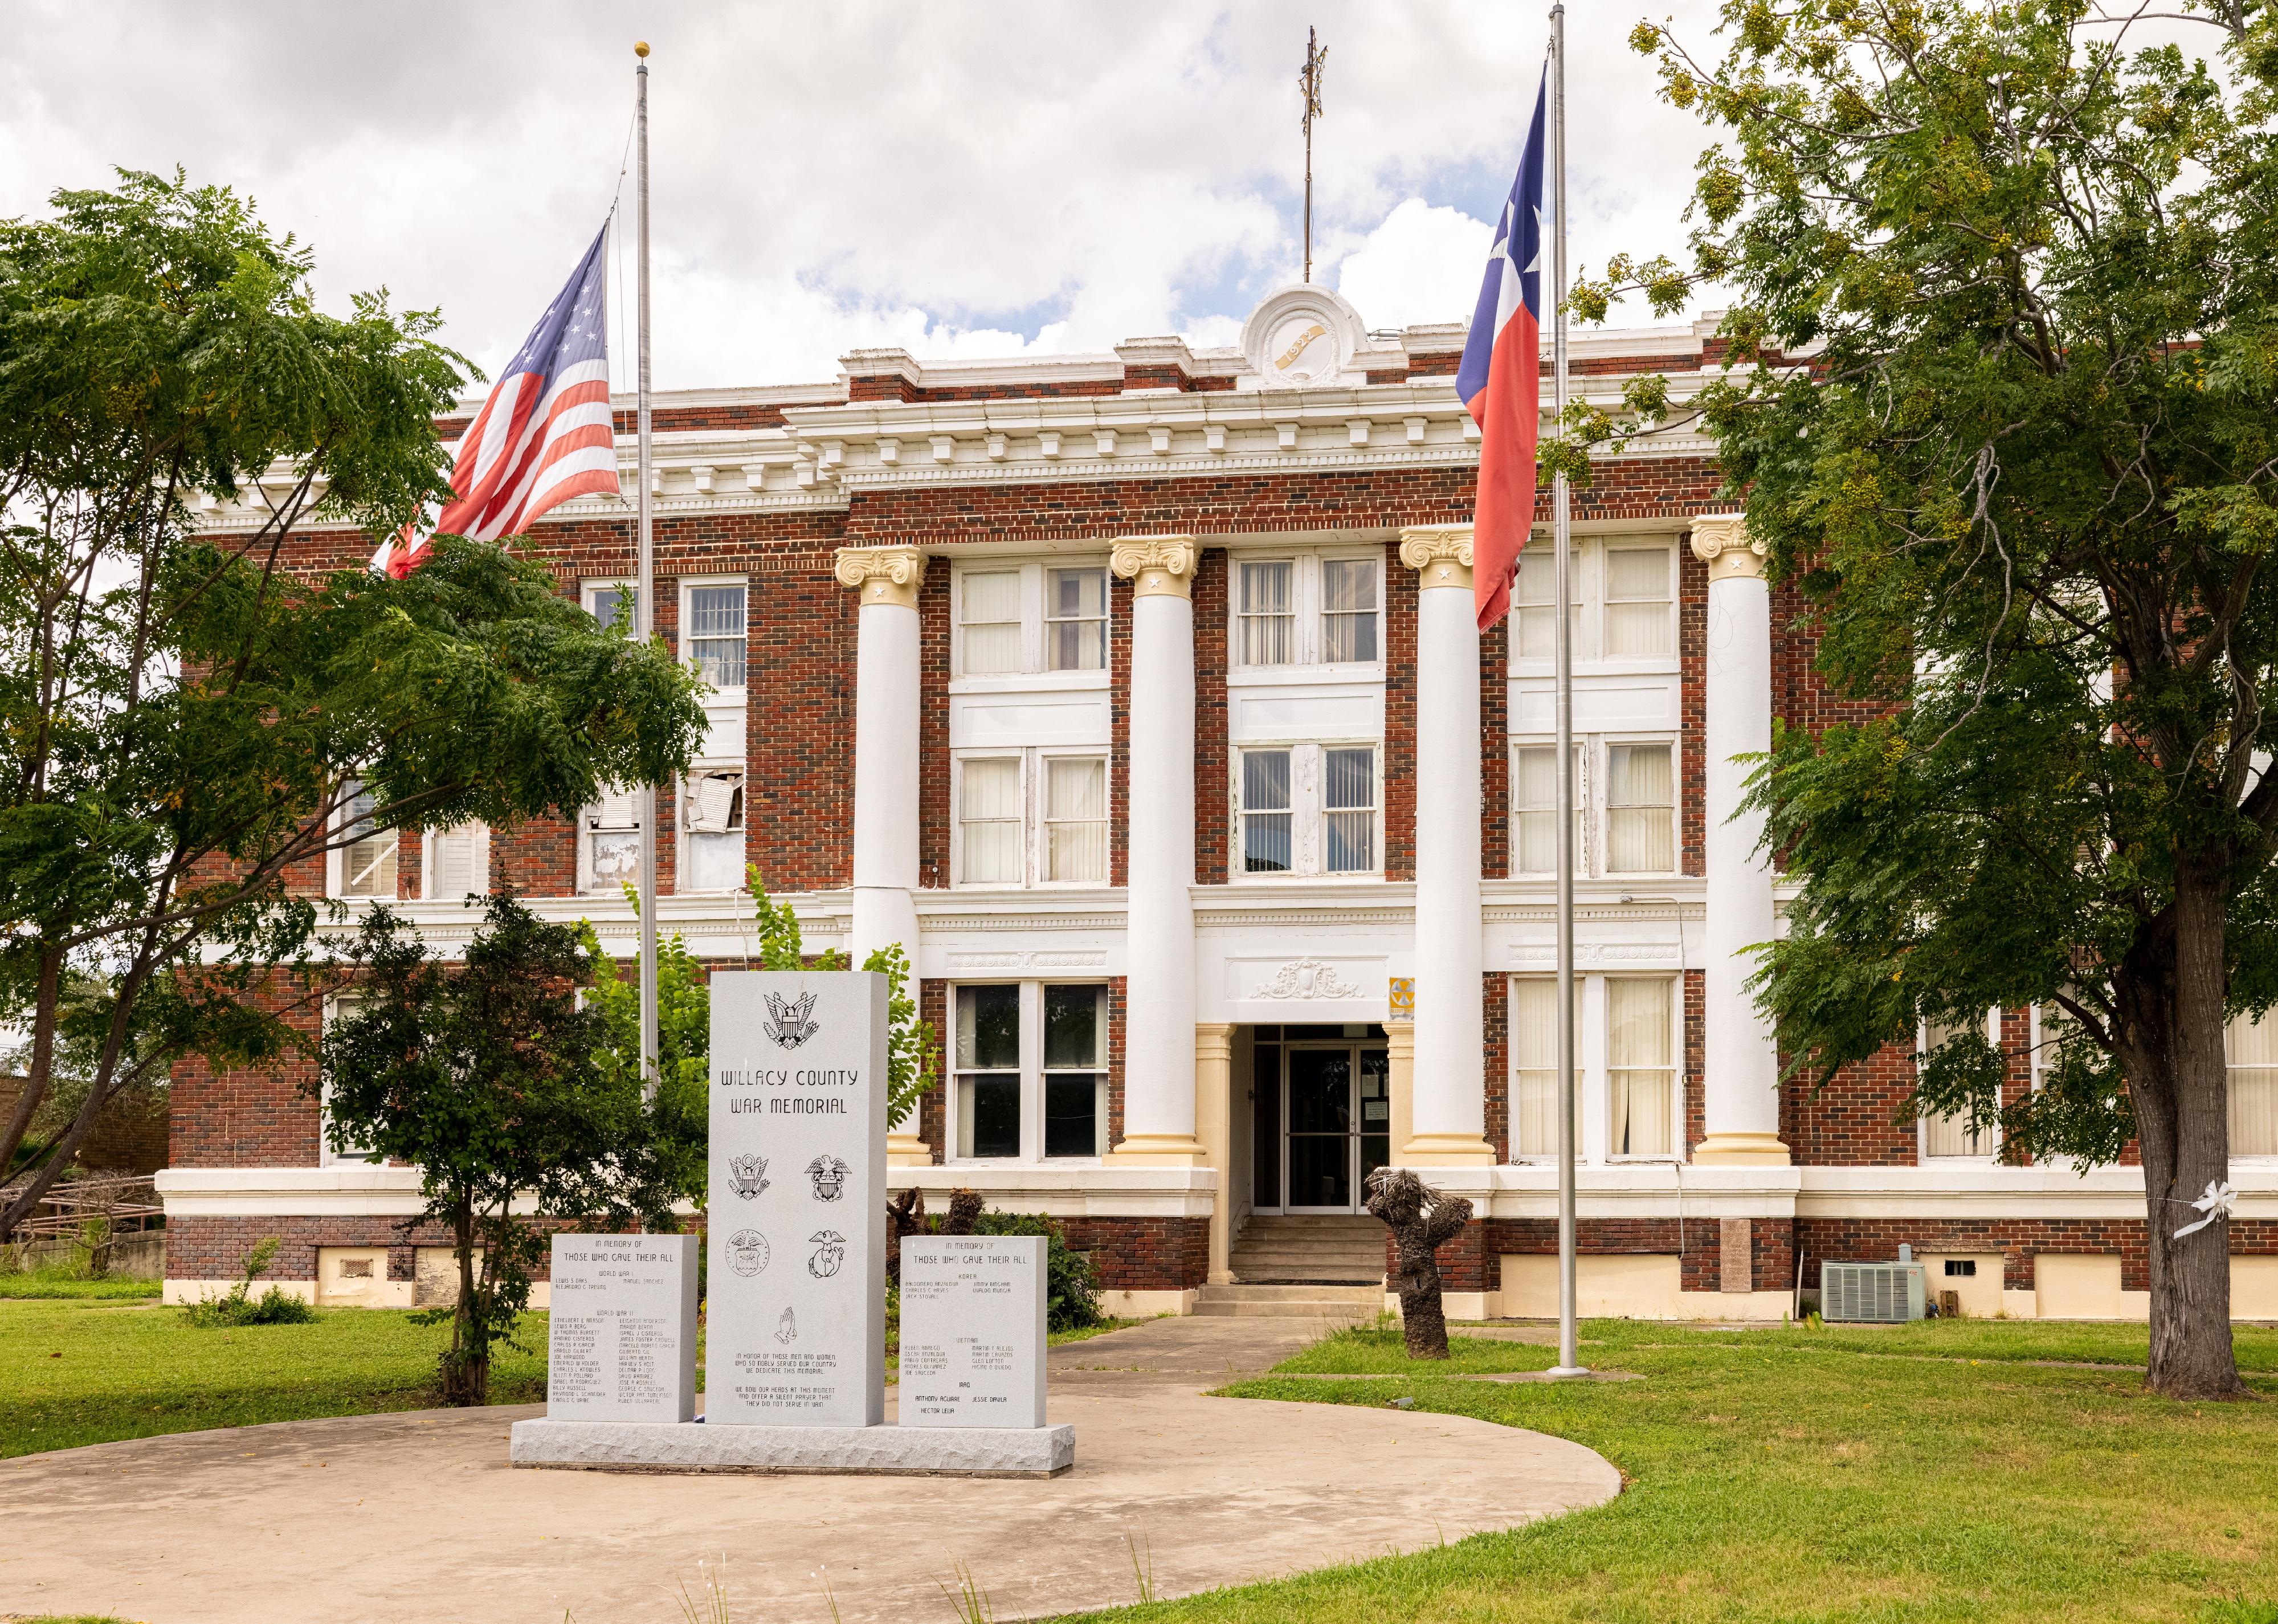 The Willacy County Courthouse and War Memorial.